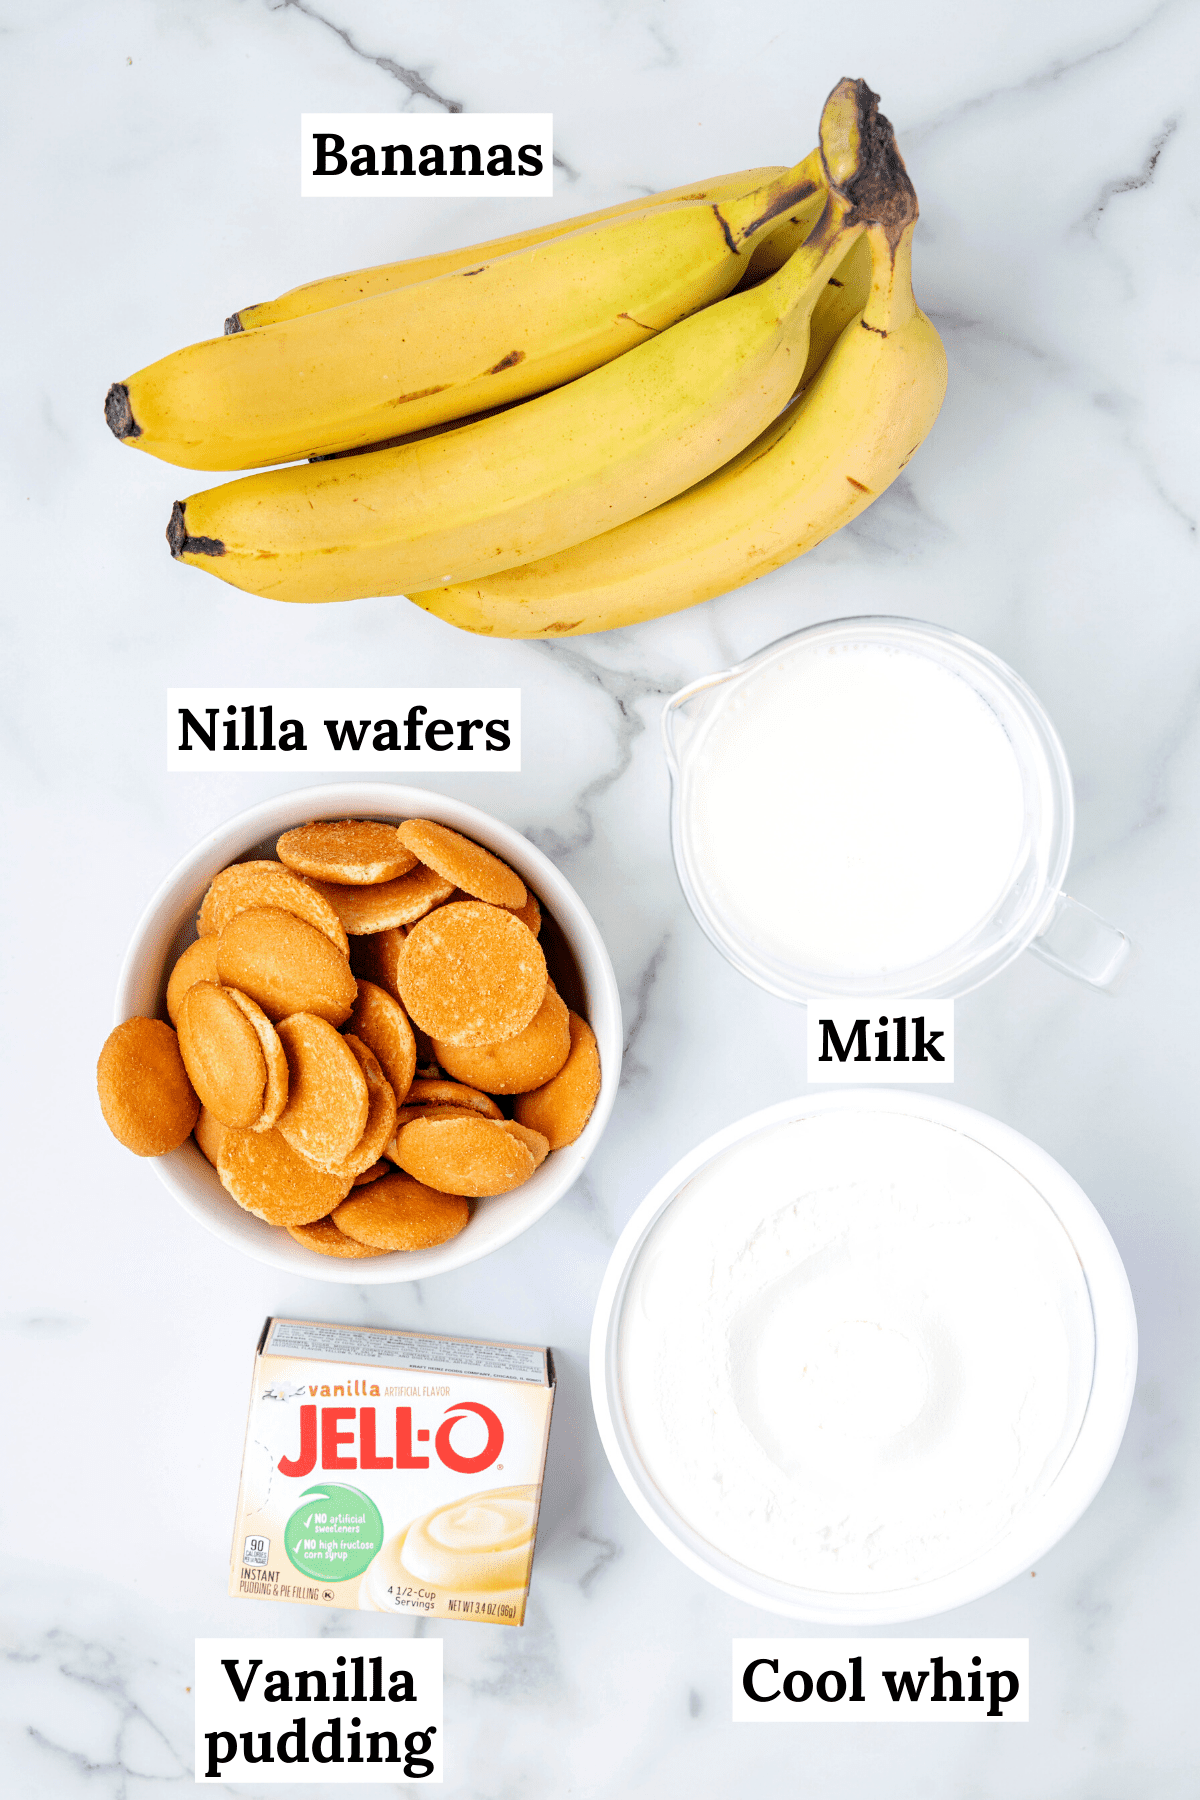 ingredients for easy banana pudding recipe including fresh bananas, milk, nilla wafers, a box of instant vanilla pudding and cool whip